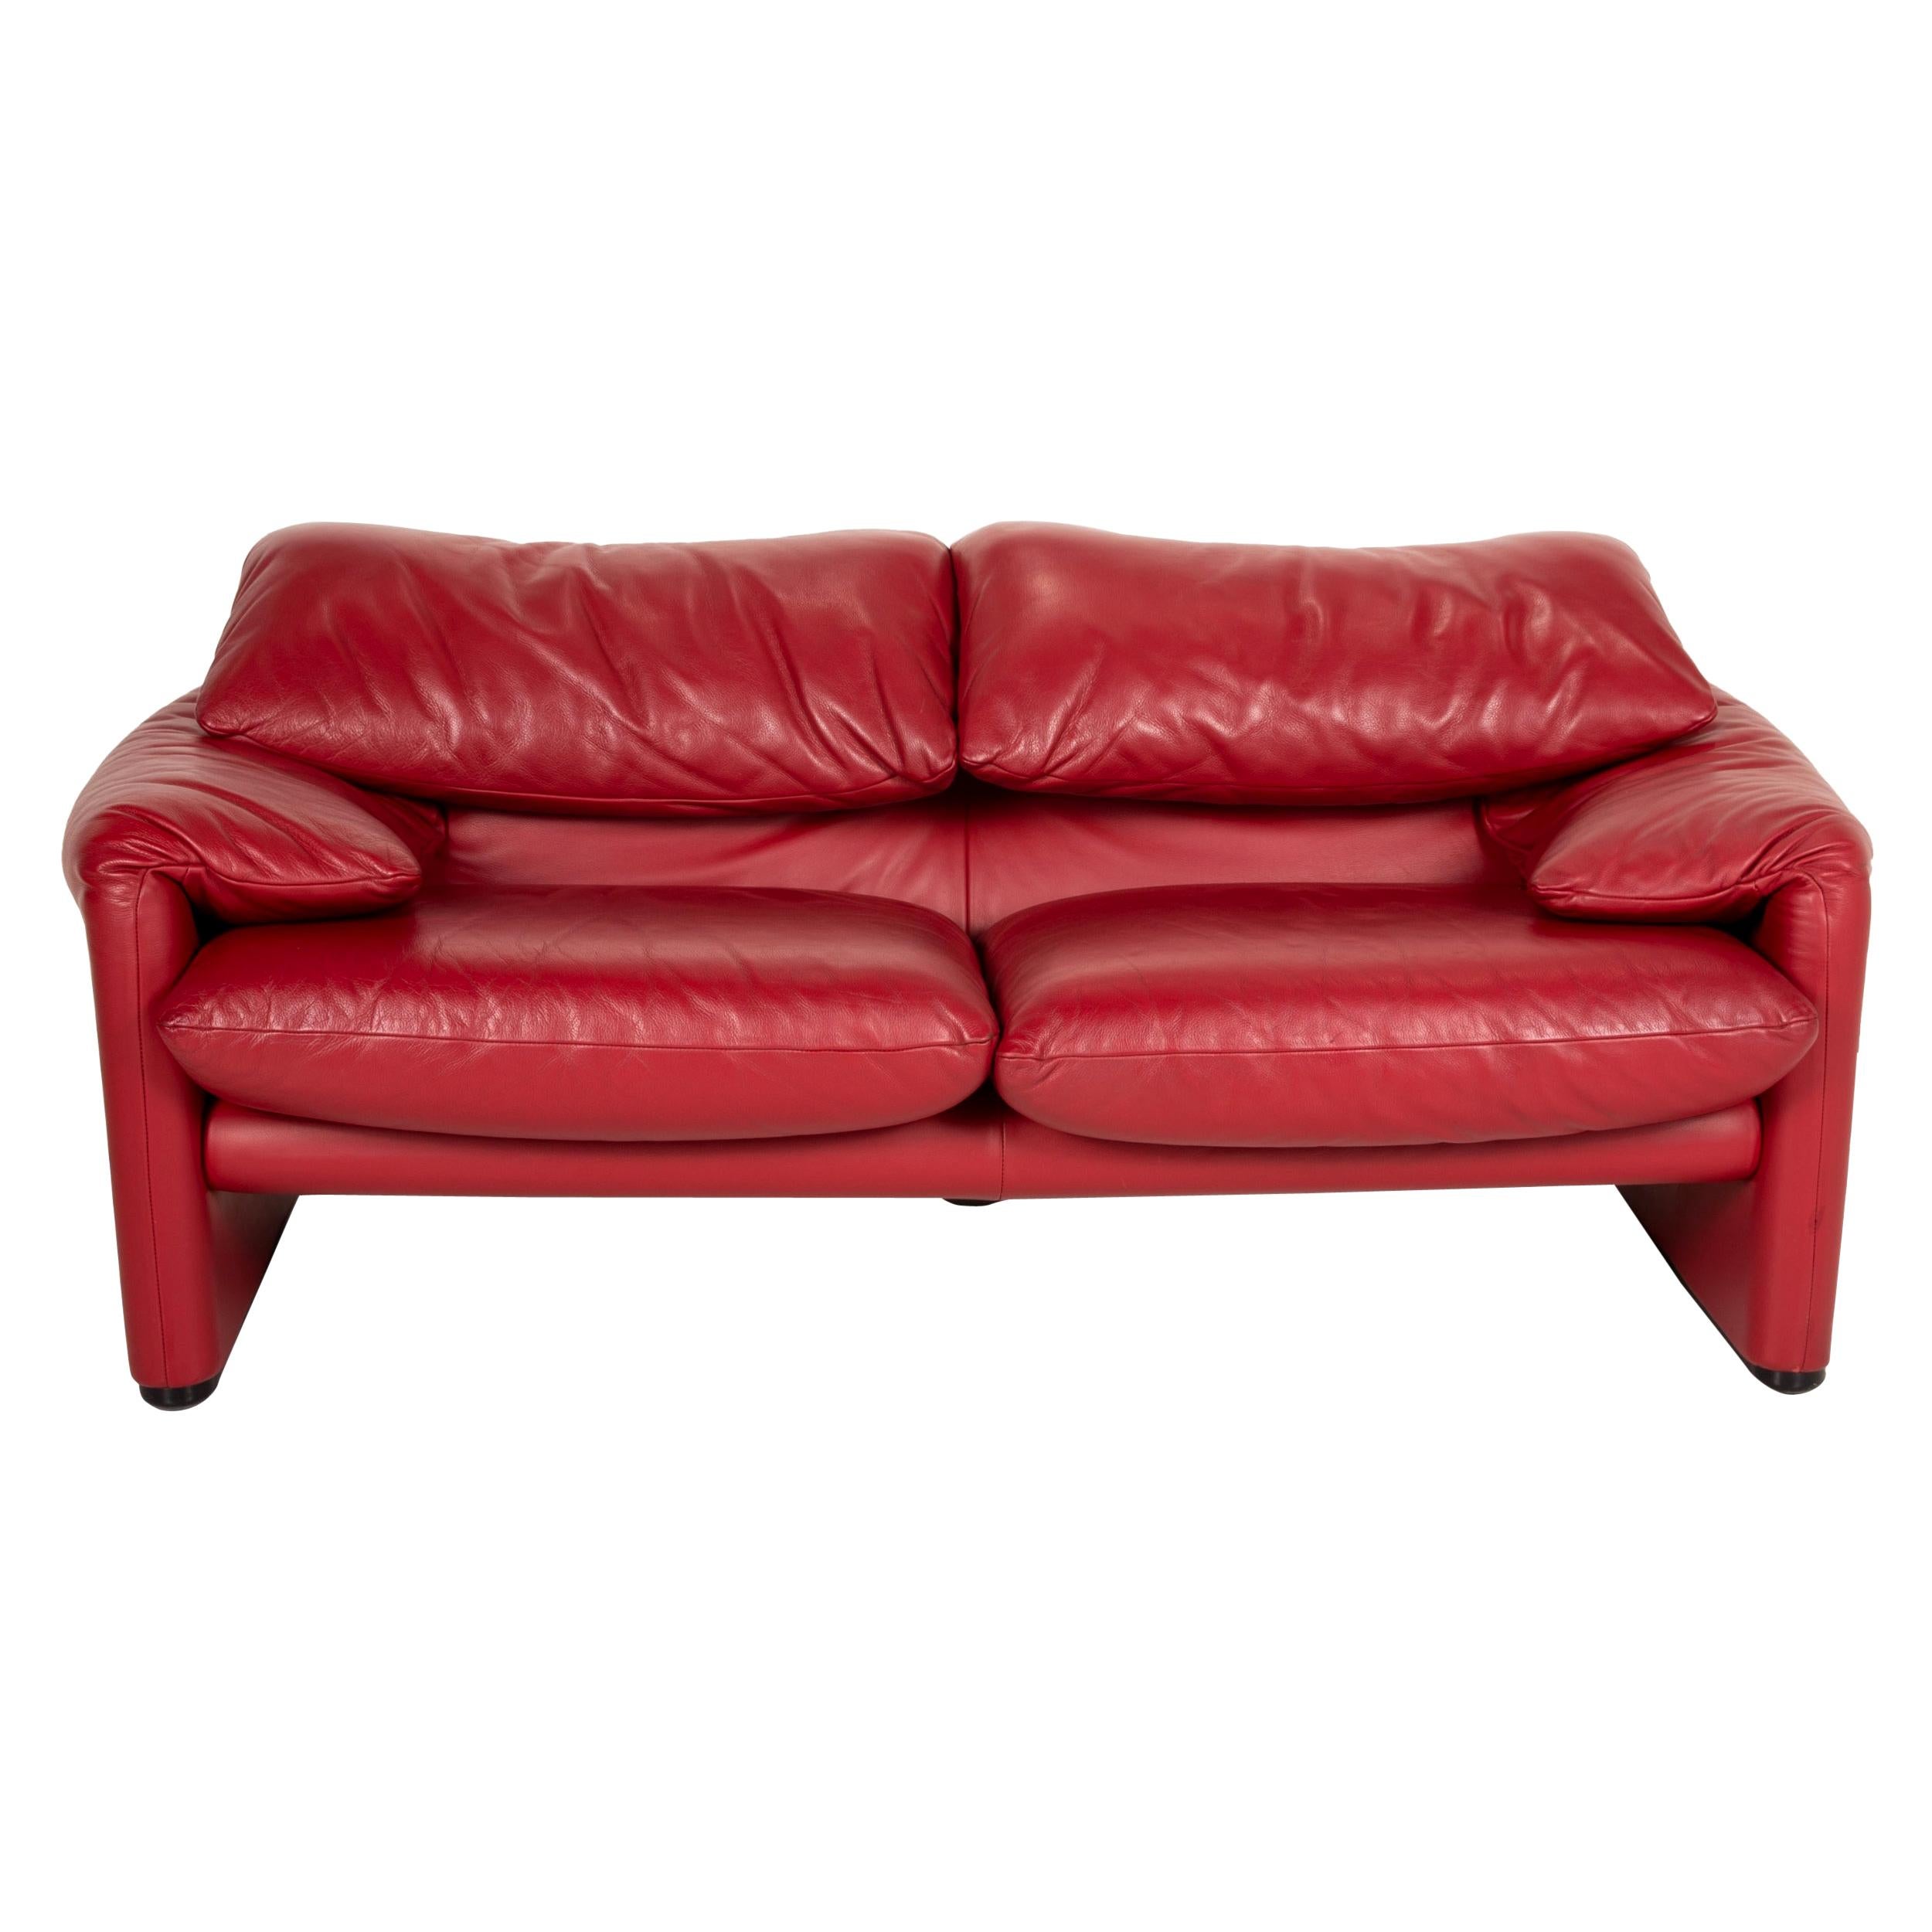 Cassina Maralunga Designer Leather Sofa Red Two-Seater Couch Function